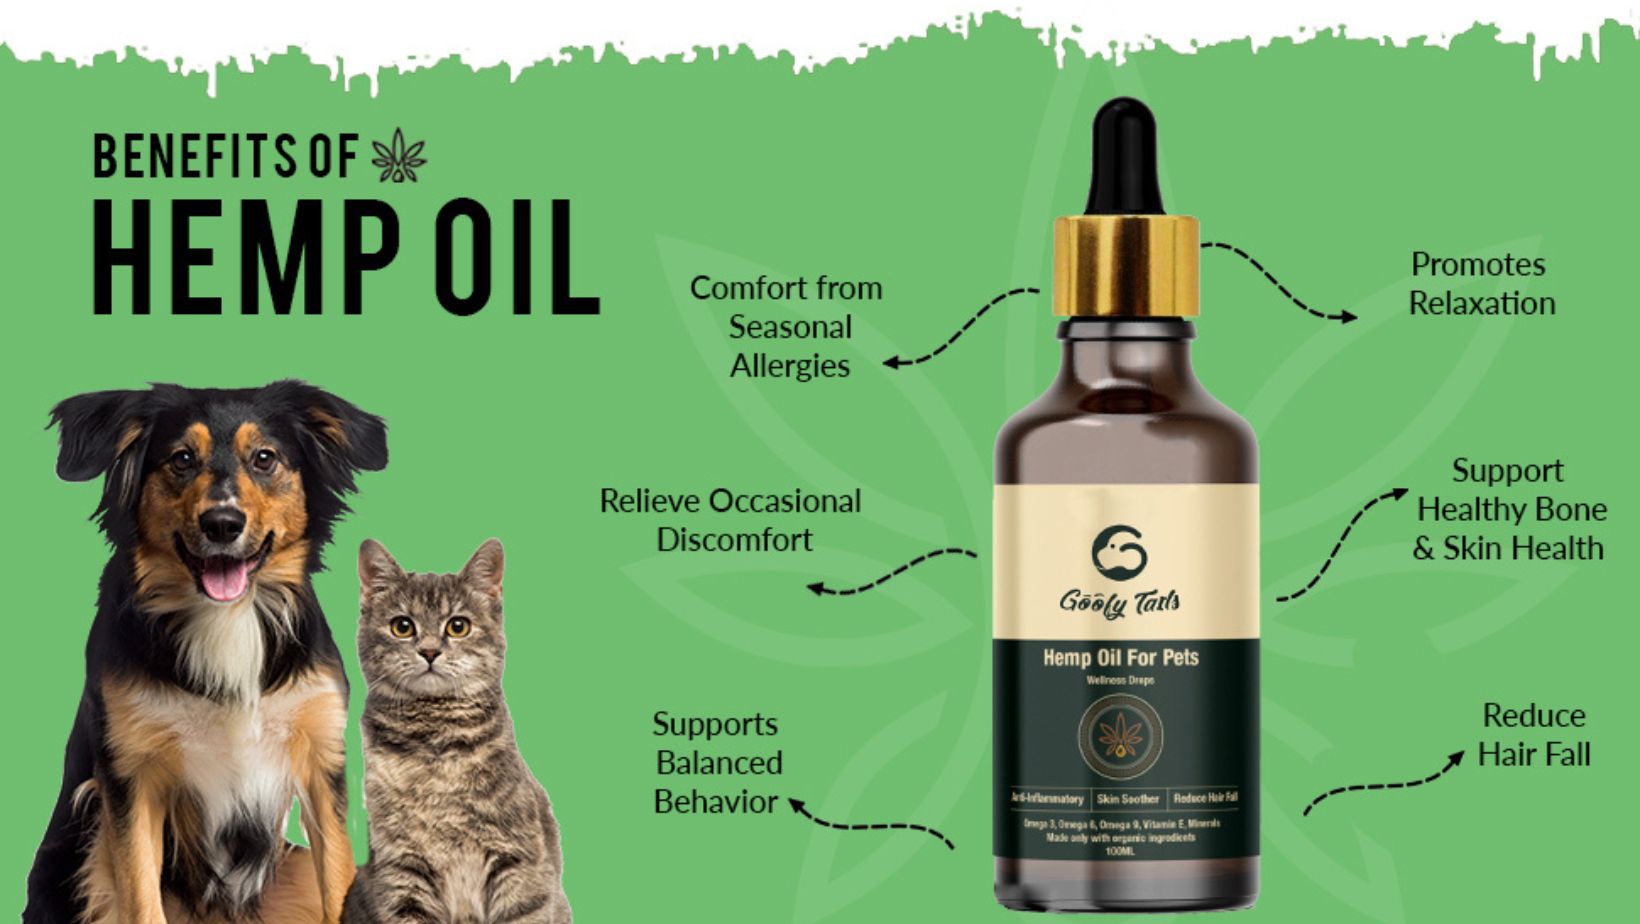 CBD Relief Oil for Dogs & Cats - Hemp Well